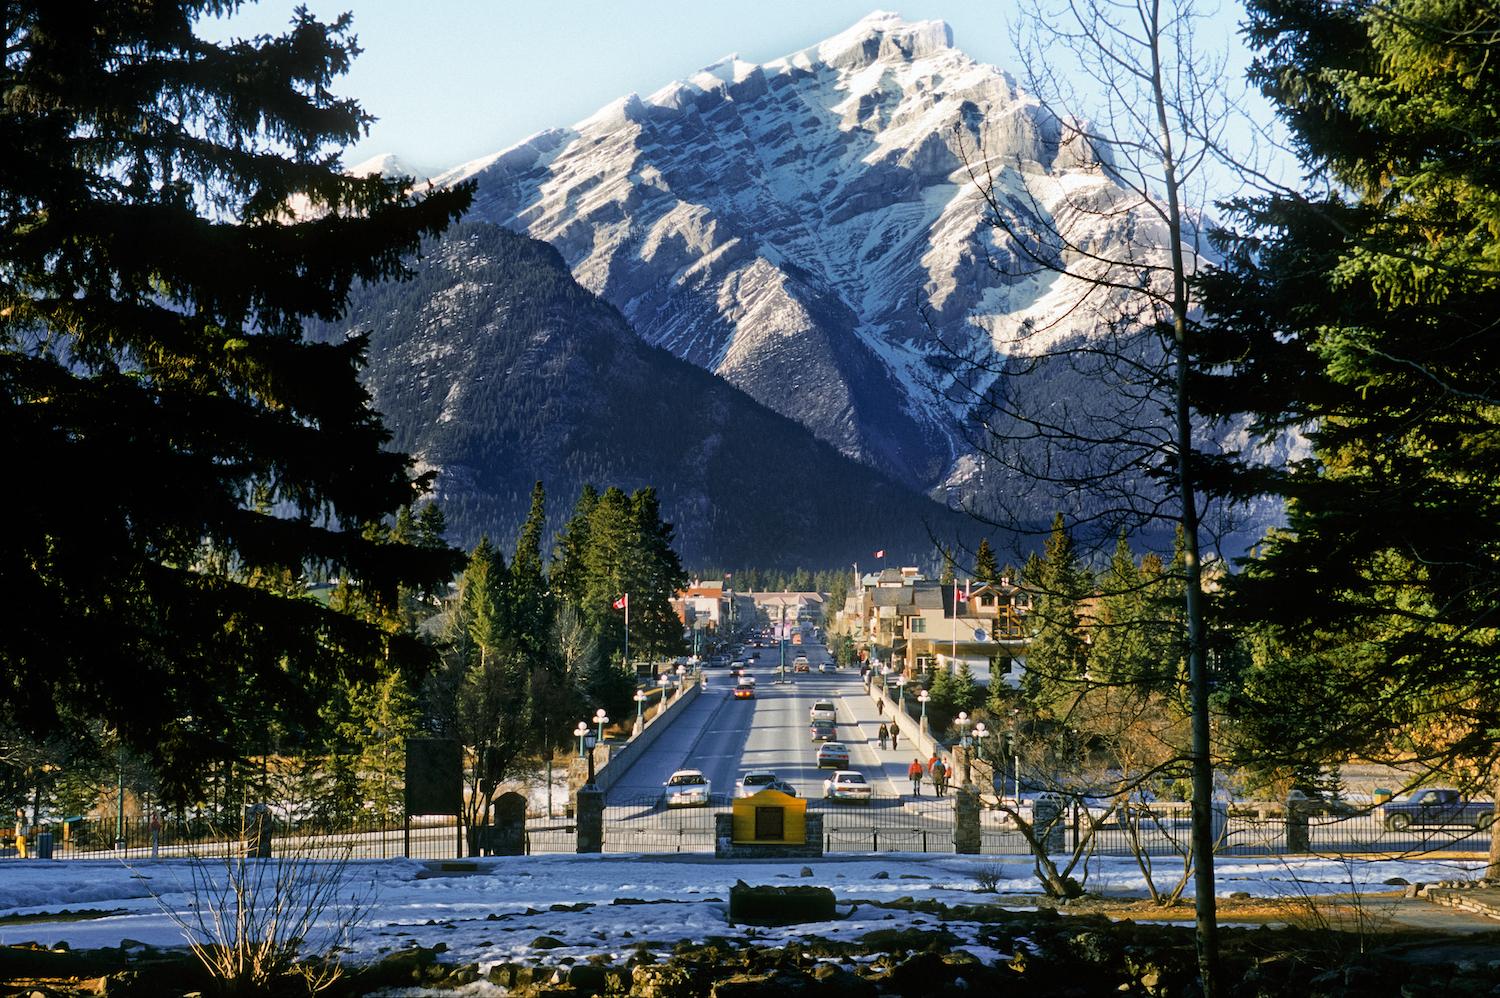 Banff Avenue is in the town of Banff within Banff National Park.